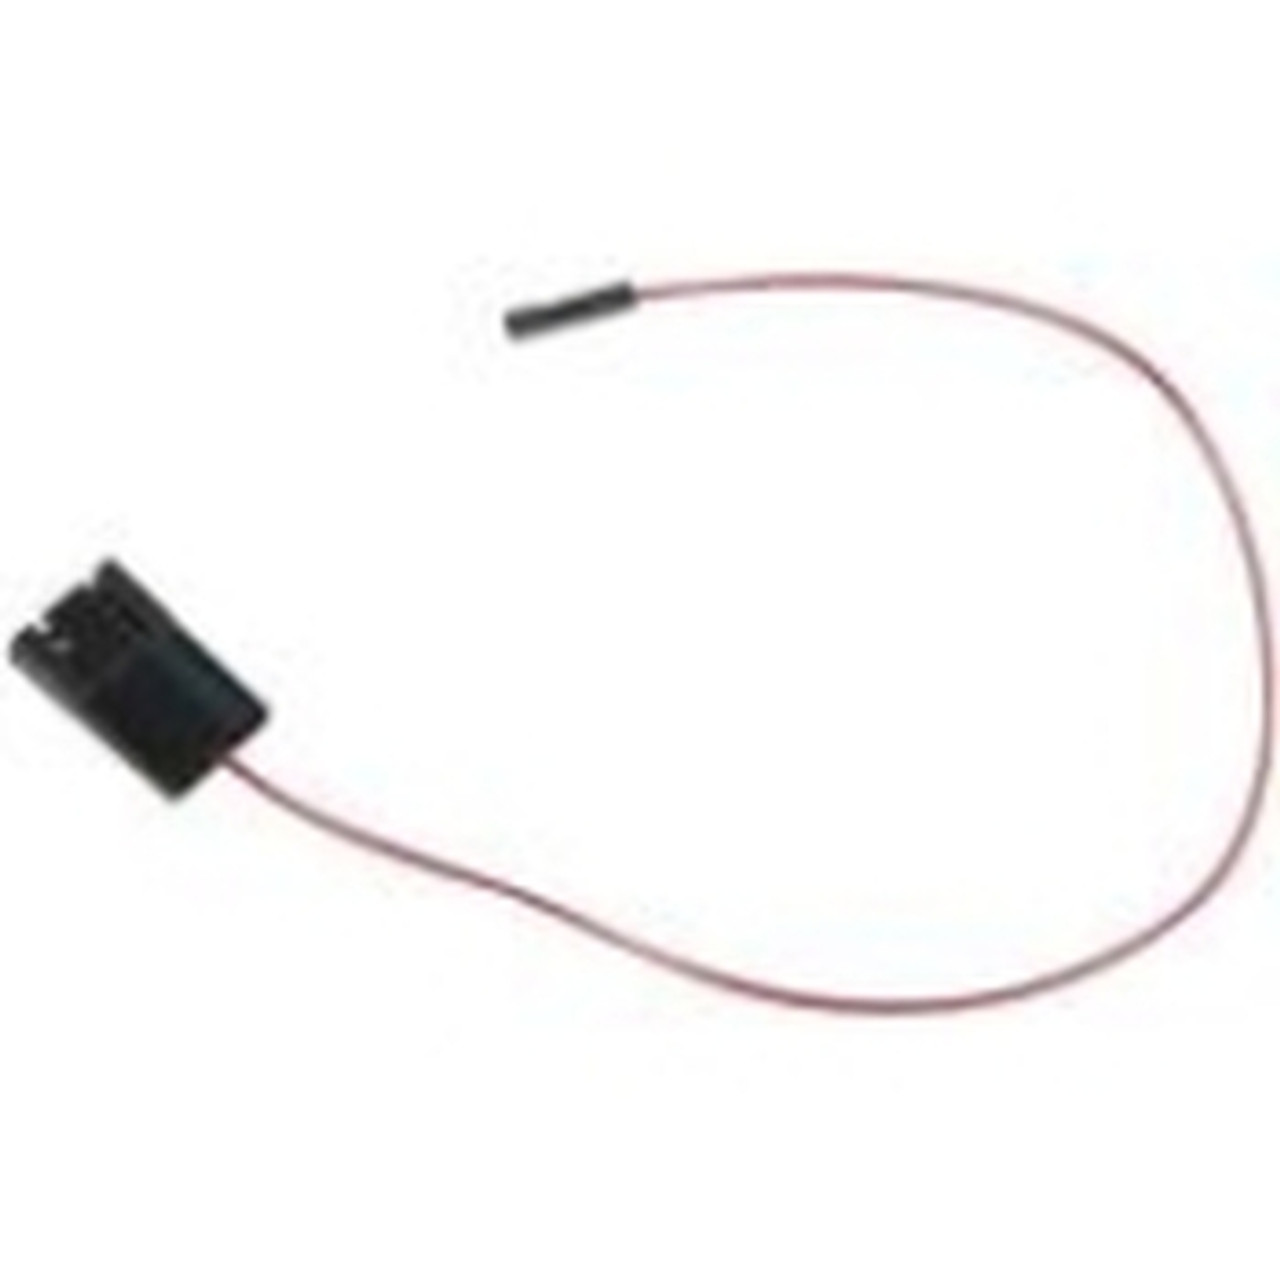 CBL-CDAT-0596 Supermicro Standard Power Cord For Chassis Power Supply